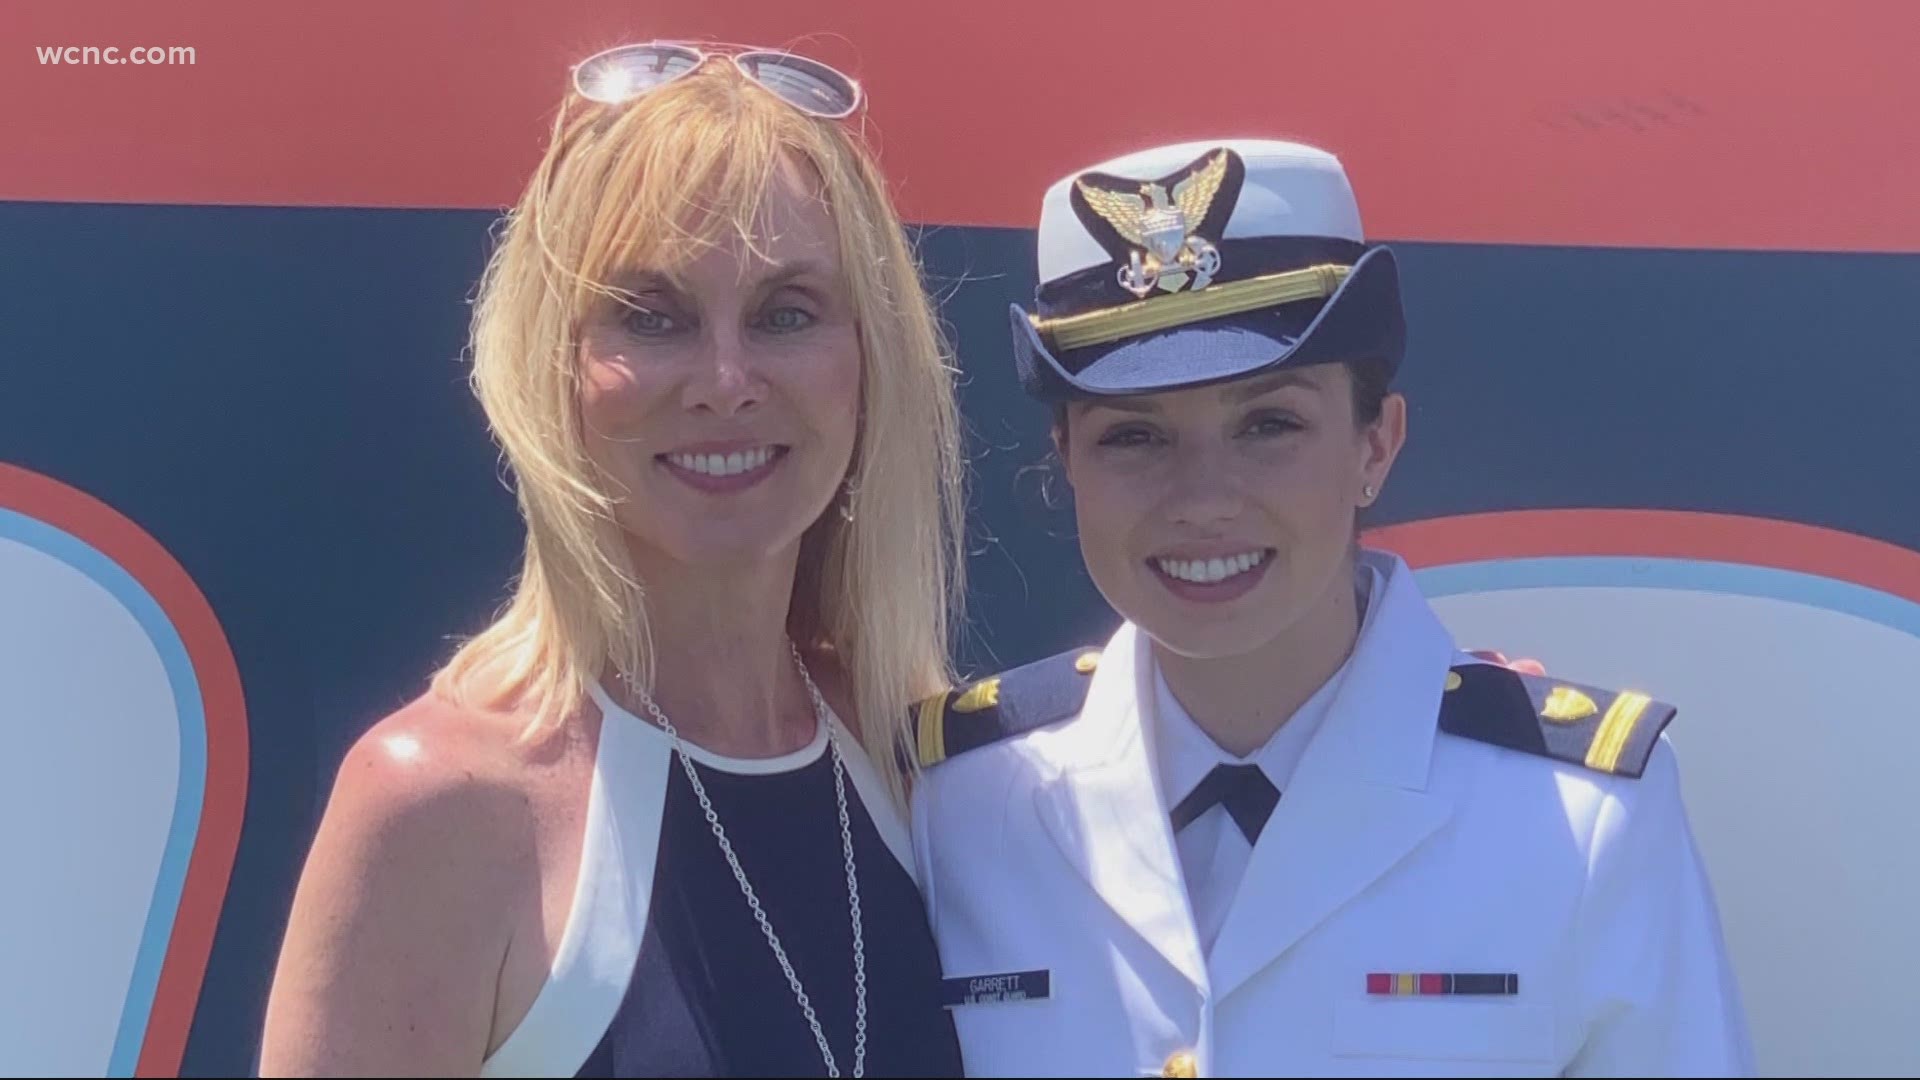 The Union County native died after her Navy training plane crashed. Her mother said the outpouring of love from the community has helped get her through this time.